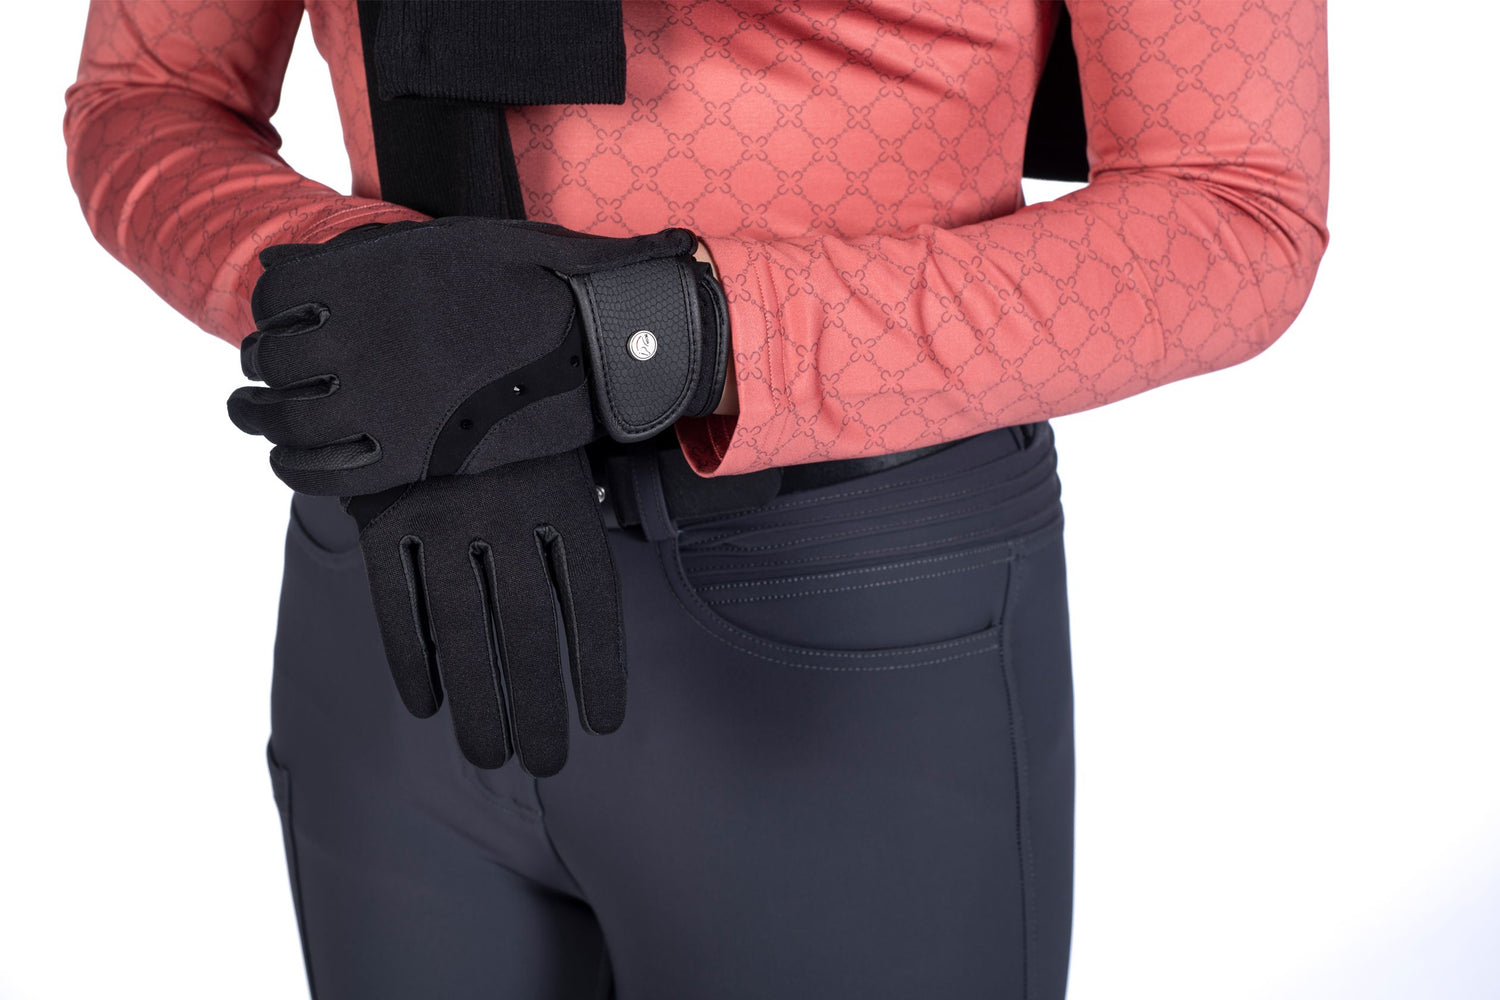 Horse riding gloves for winter